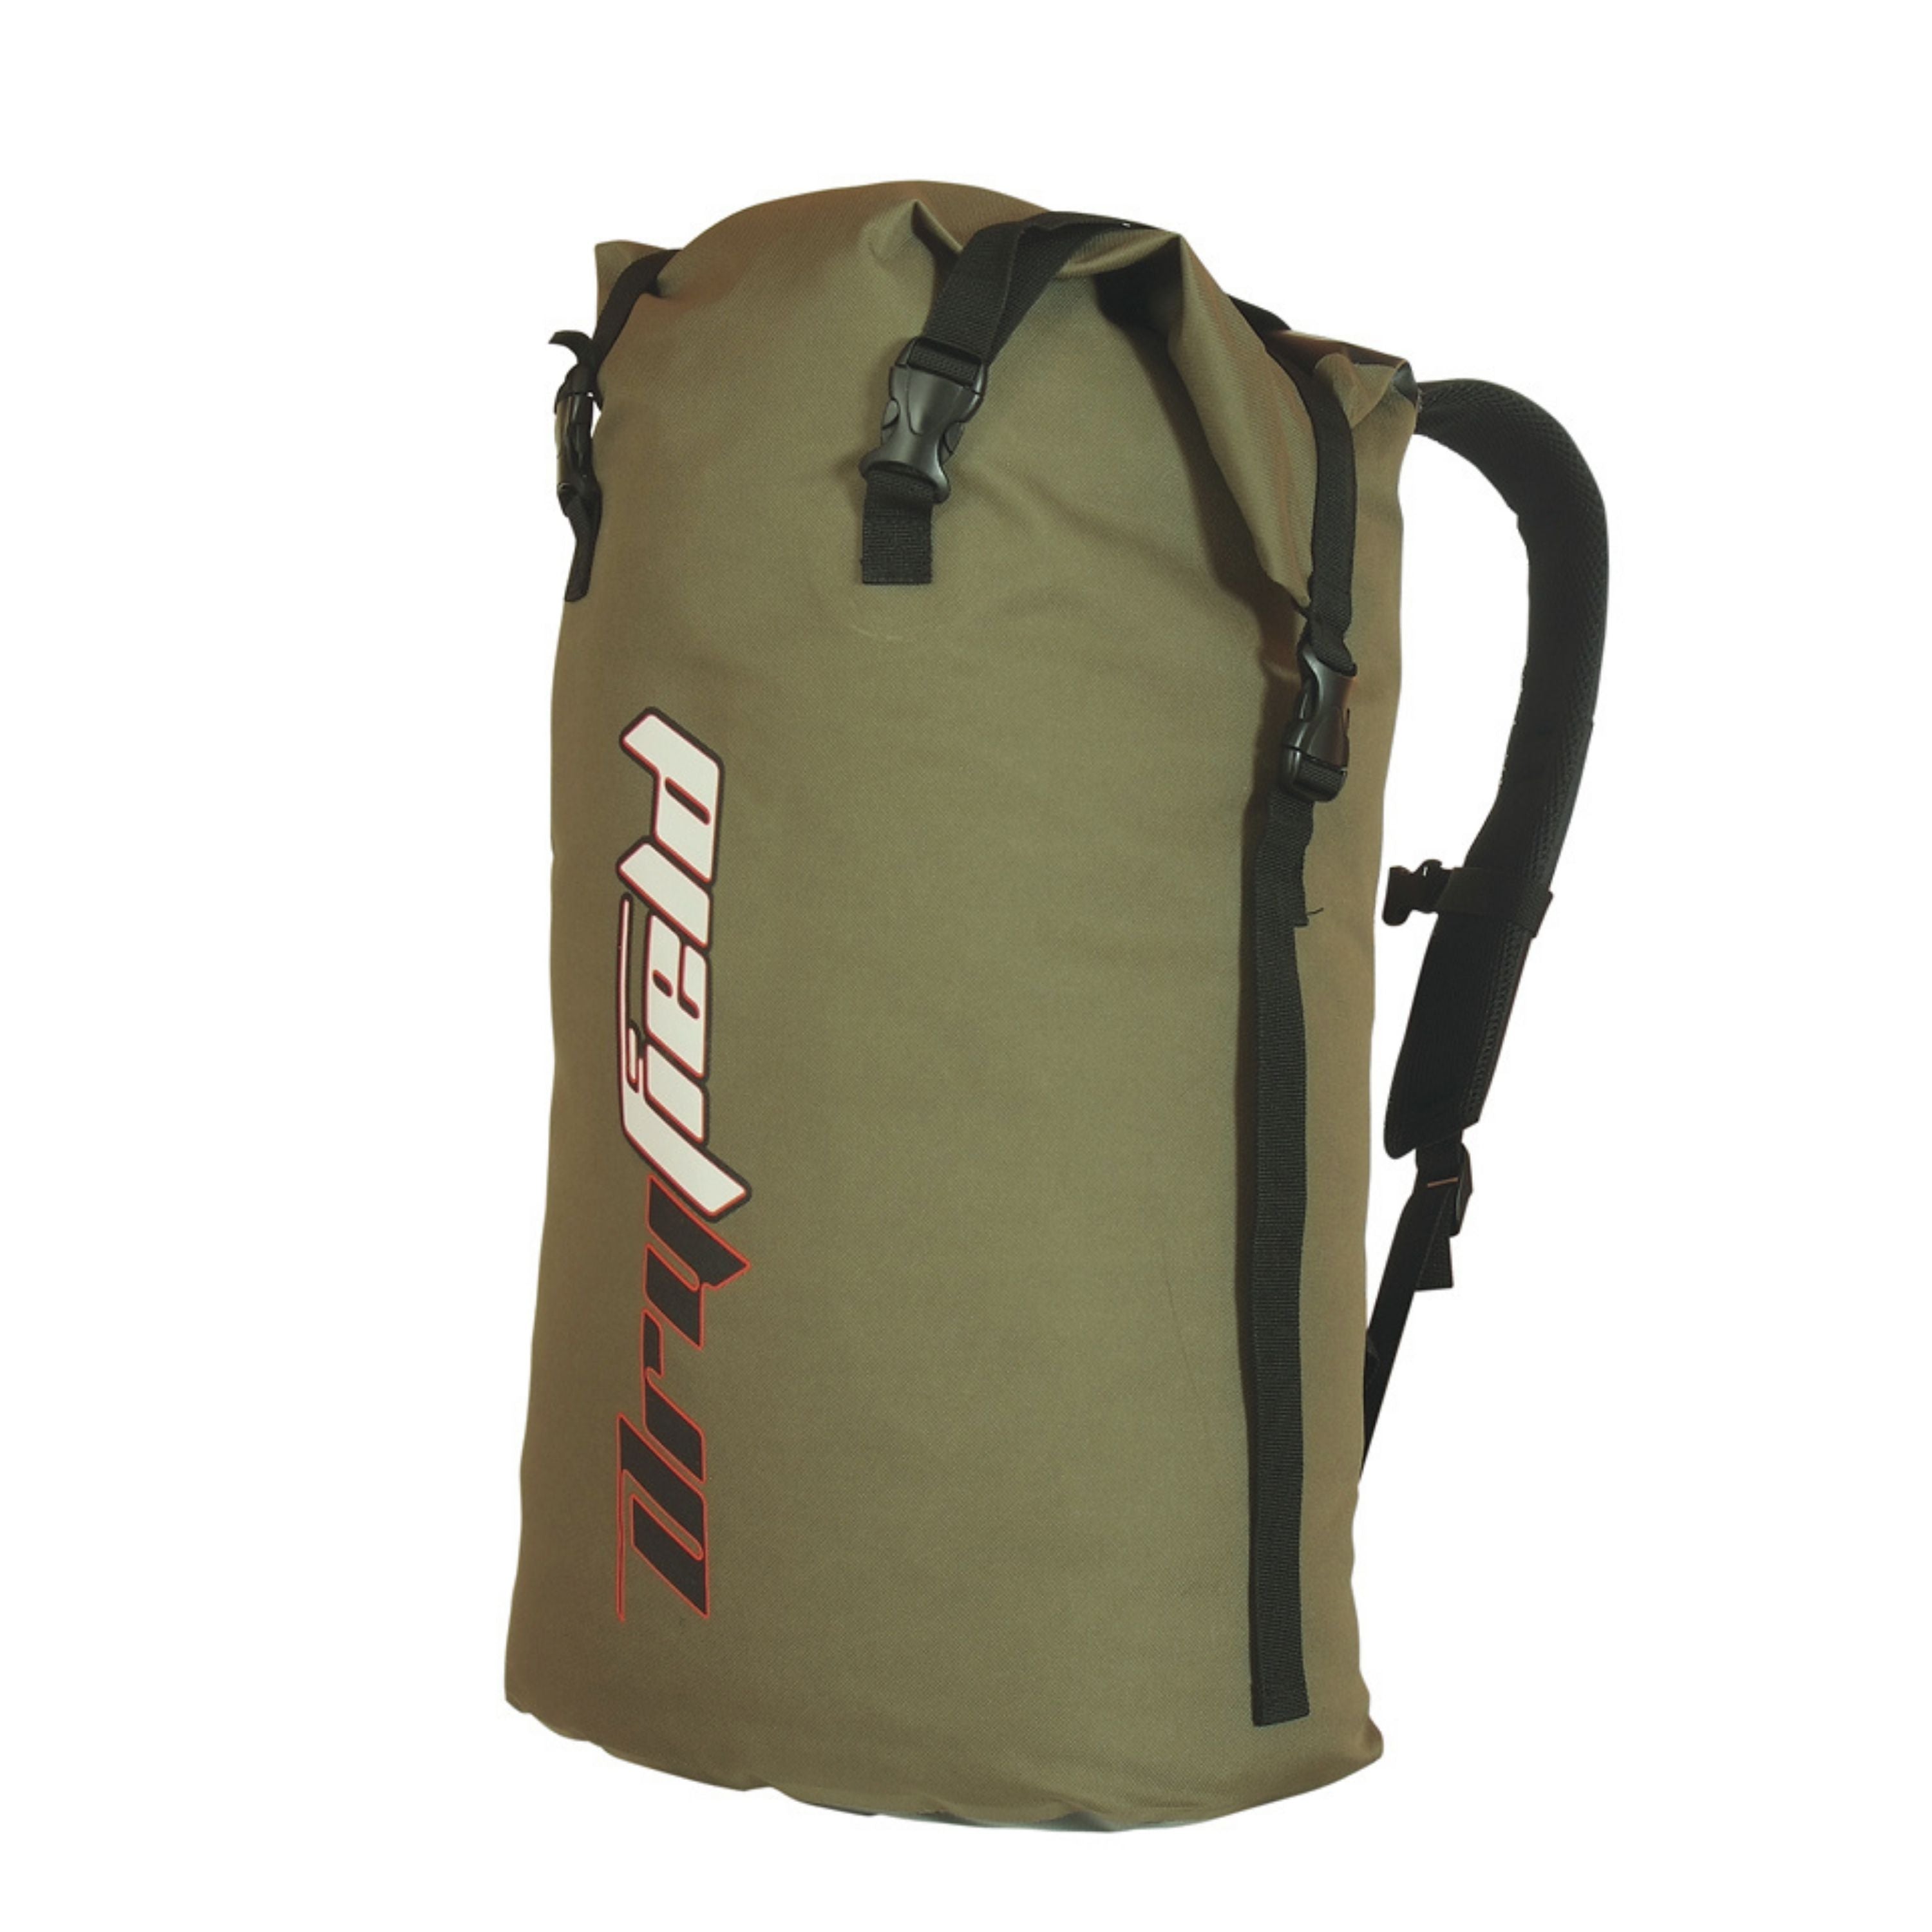 "Extreme conditions" Backpack - 80 L